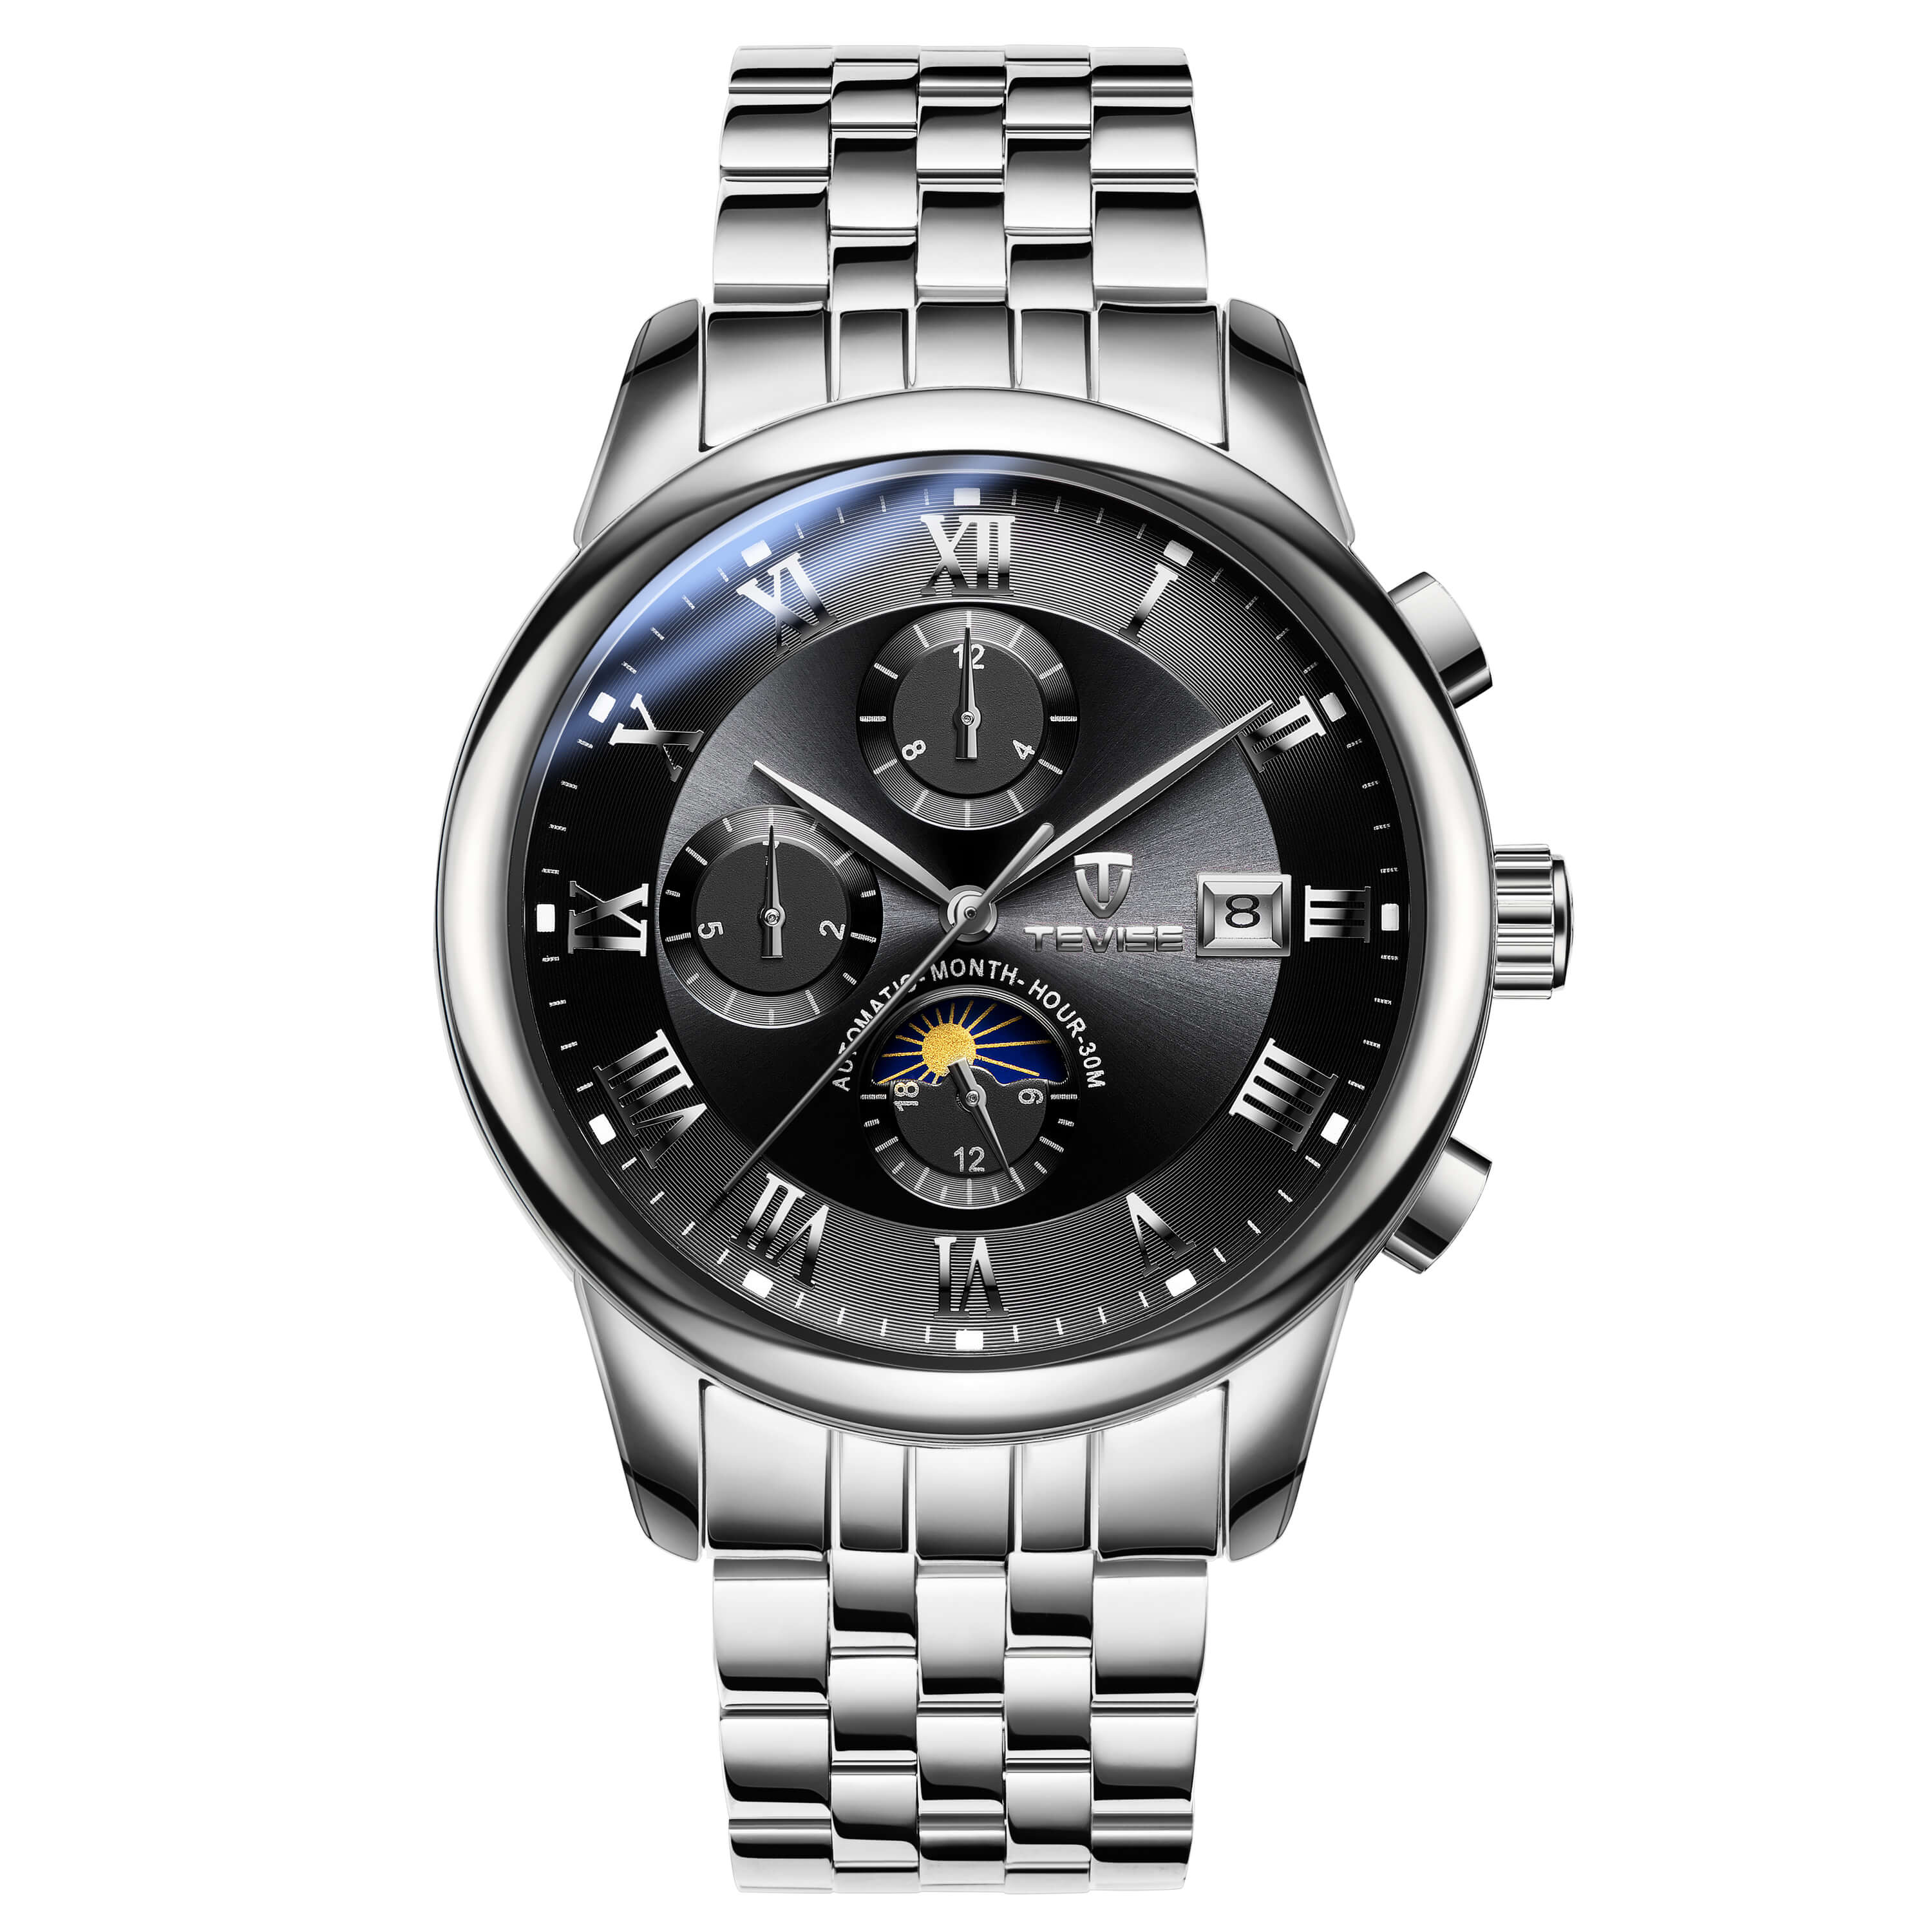 TEVISE 9008 Men's Automatic Mechanical Men's Watch Moon Phase Stainless Steel - Two Tone Black